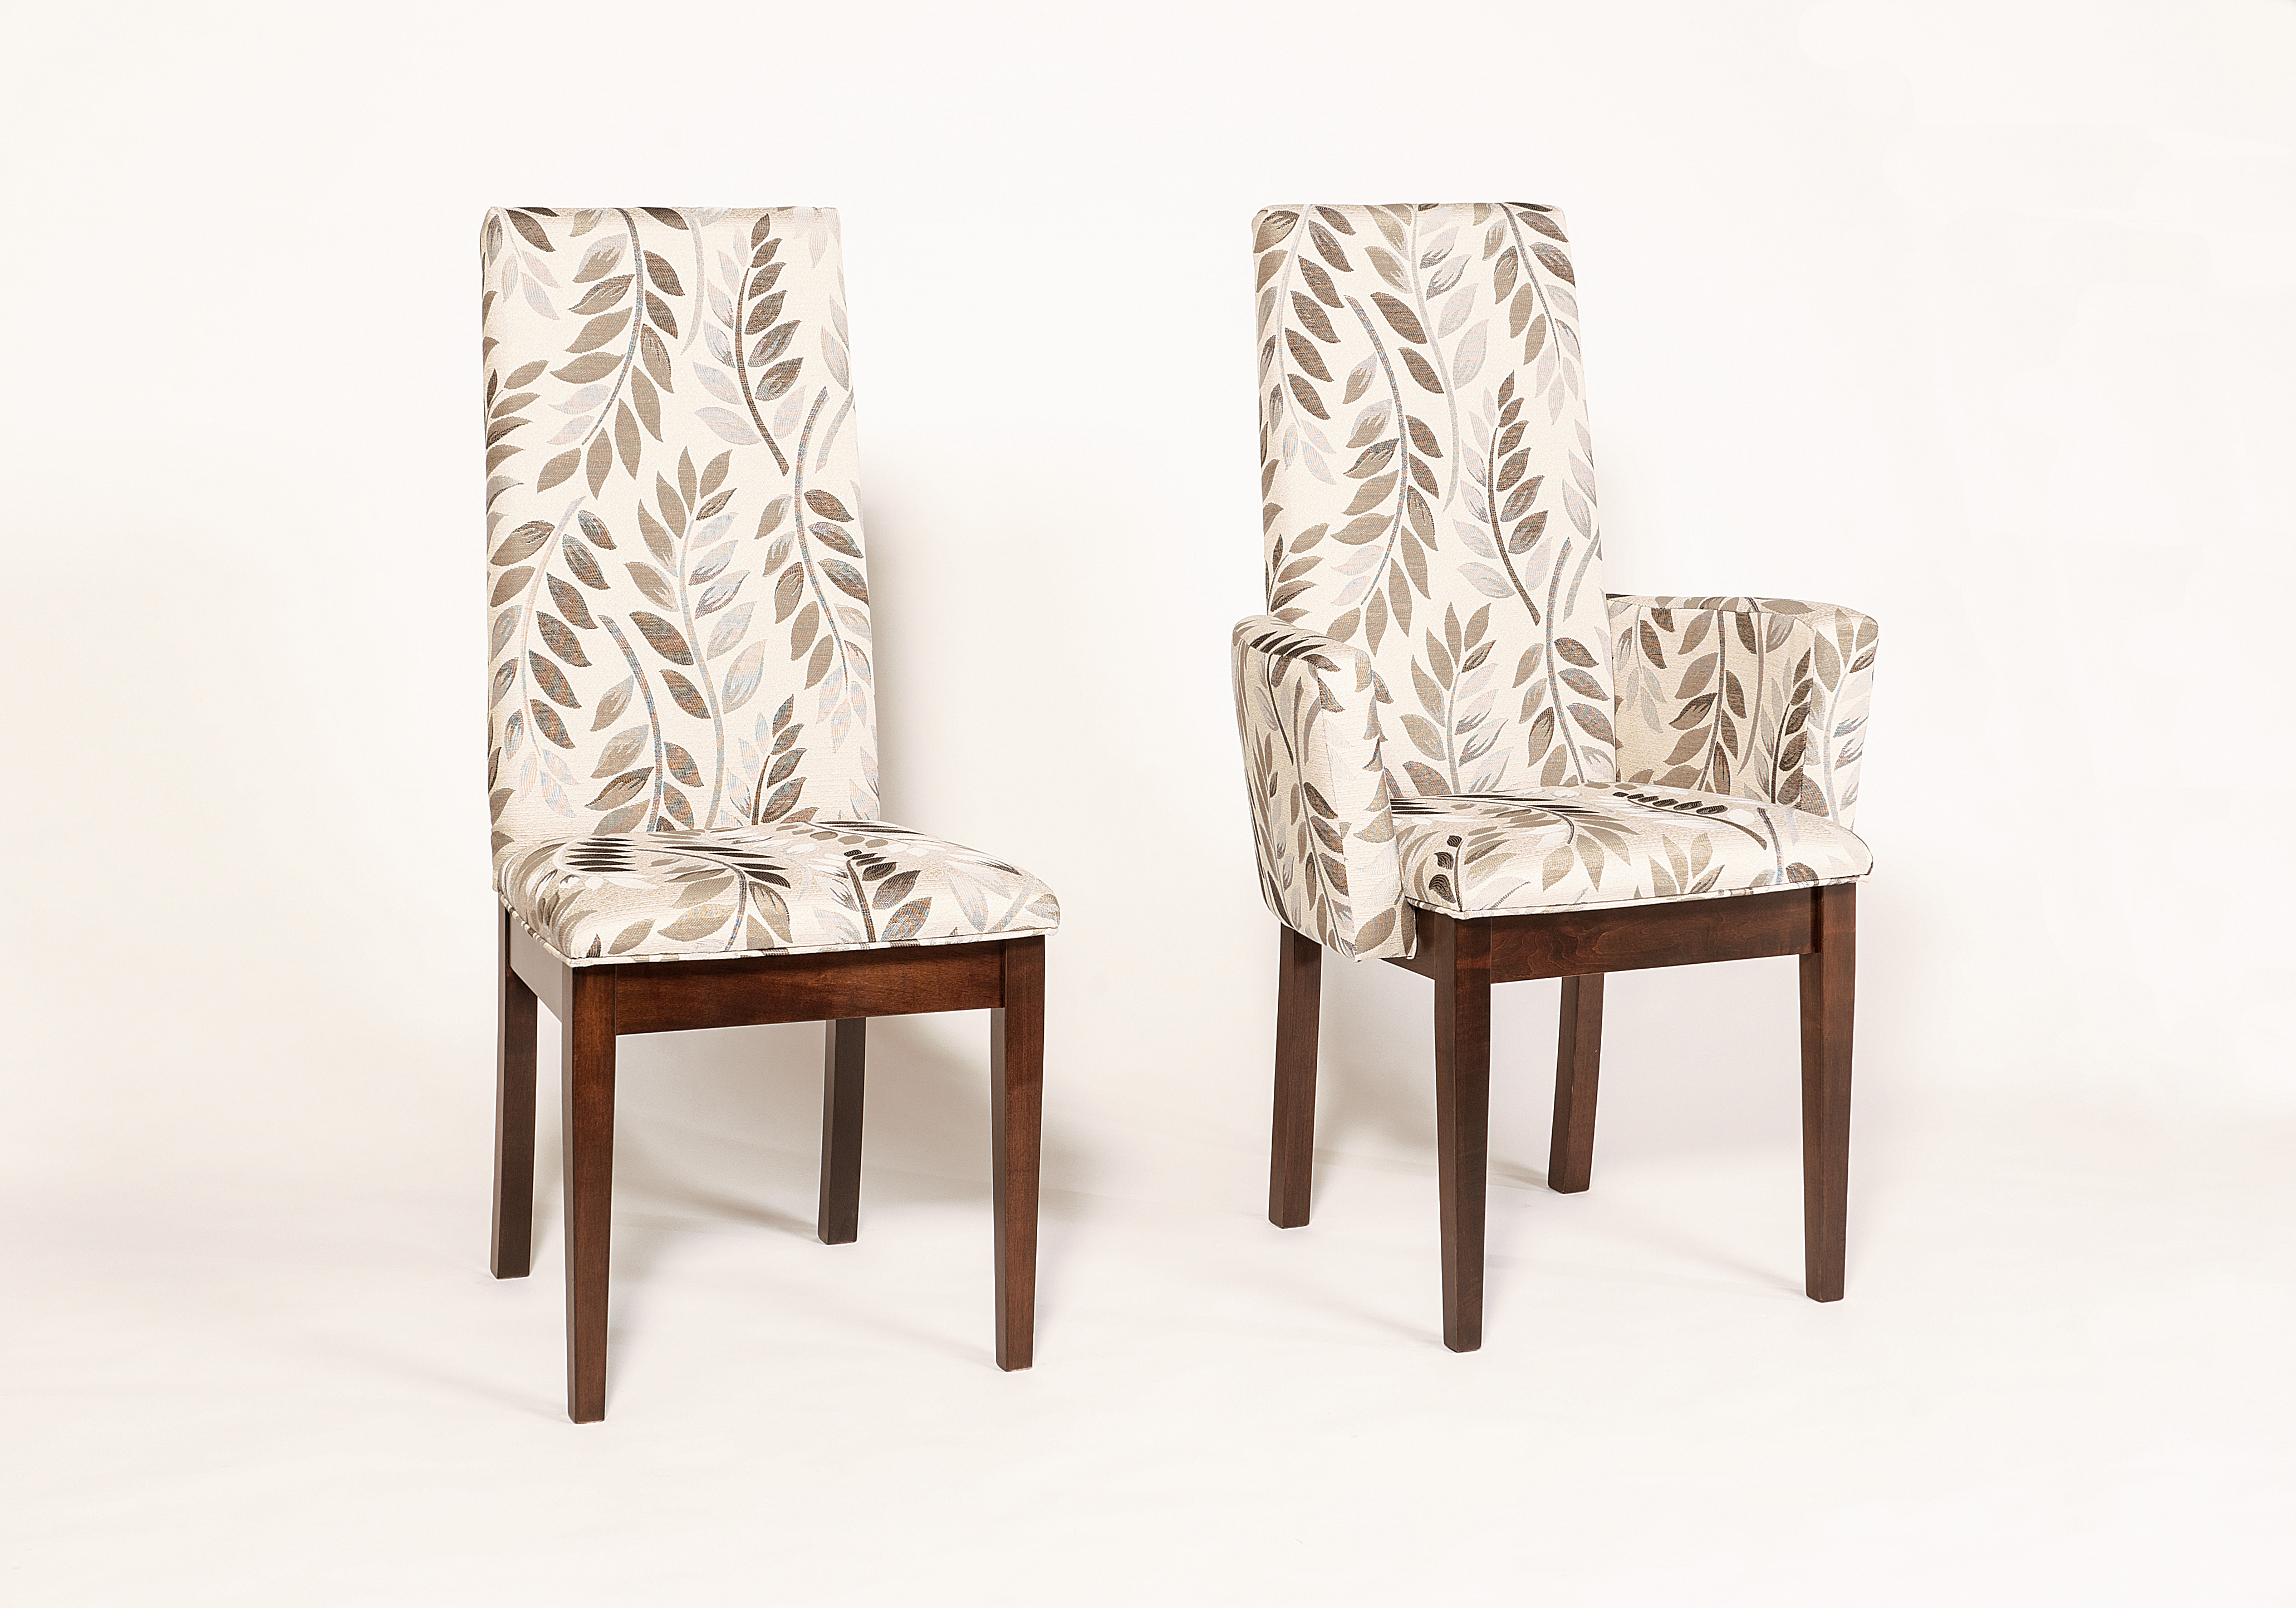 Lovely Ideas Upholstered Dining Room Chairs With Arms Clever Fully Cbepaiq  